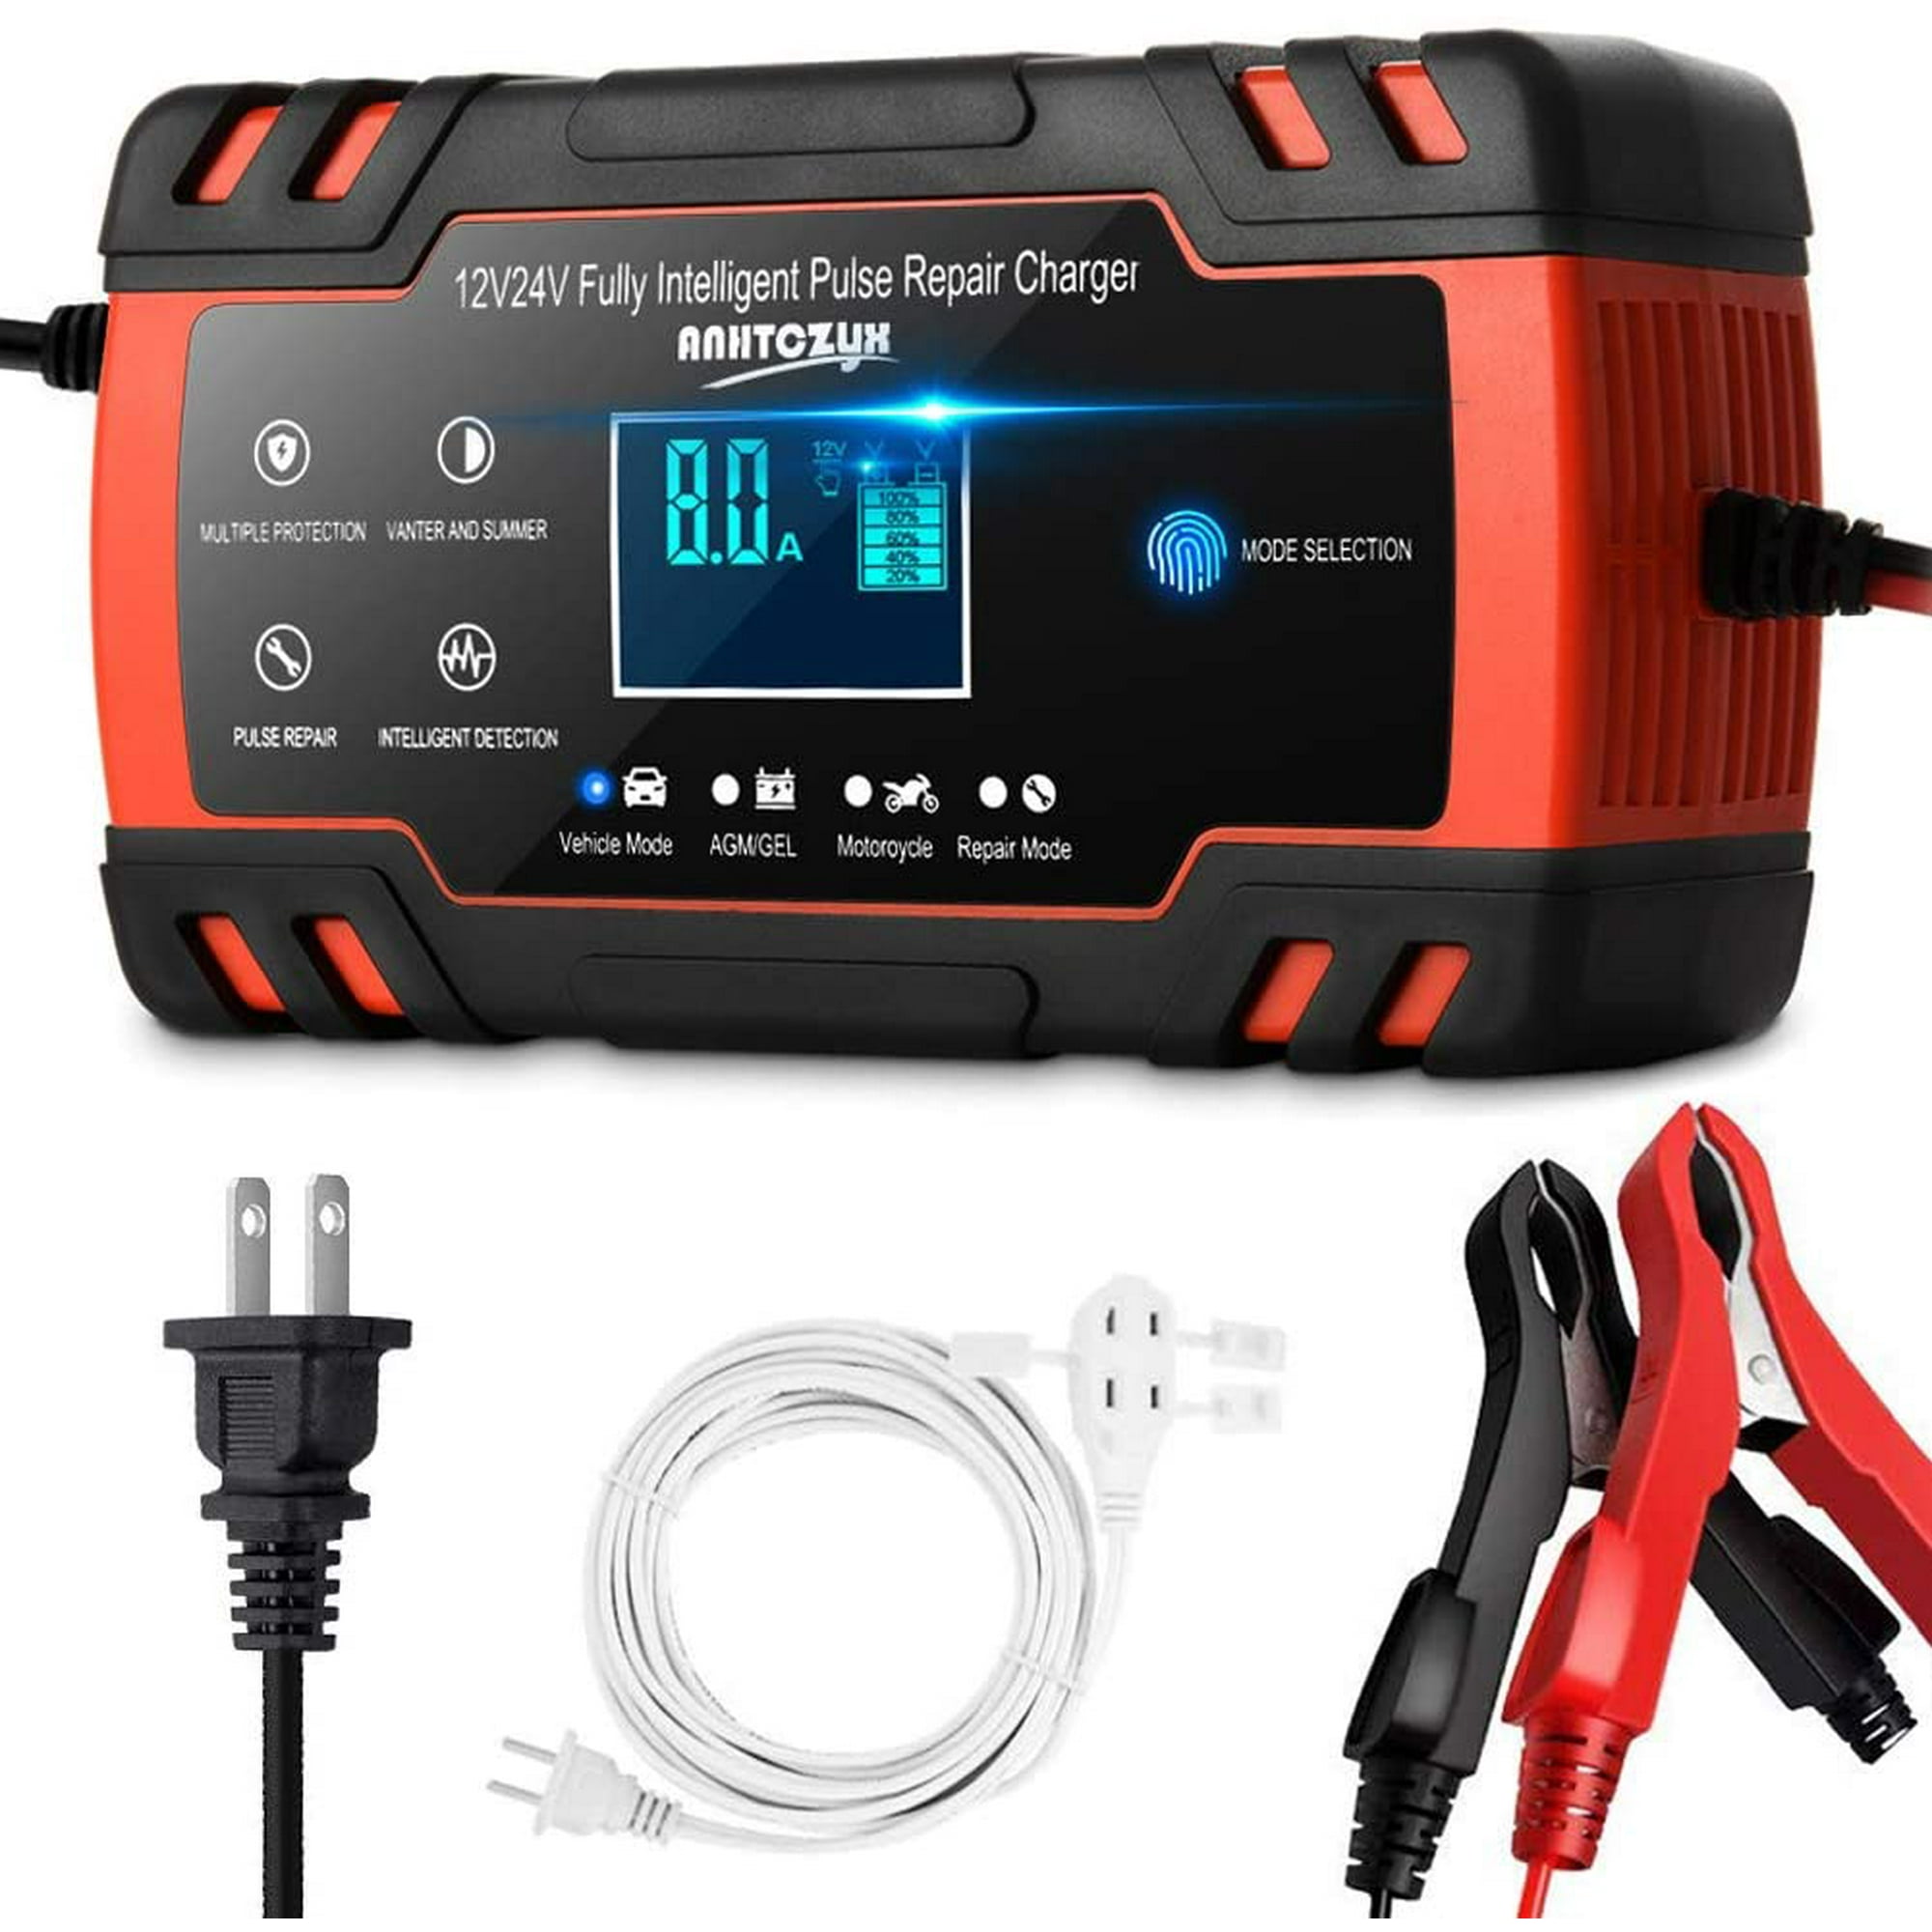 12v intelligent инструкция. Battery Charger 12v/24. Fully Intelligent Pulse Repair Charger 12v 24v. Pulse Repair Battery Charger 12v 8a-24v 4a. 12v Intelligent Pulse Charger.